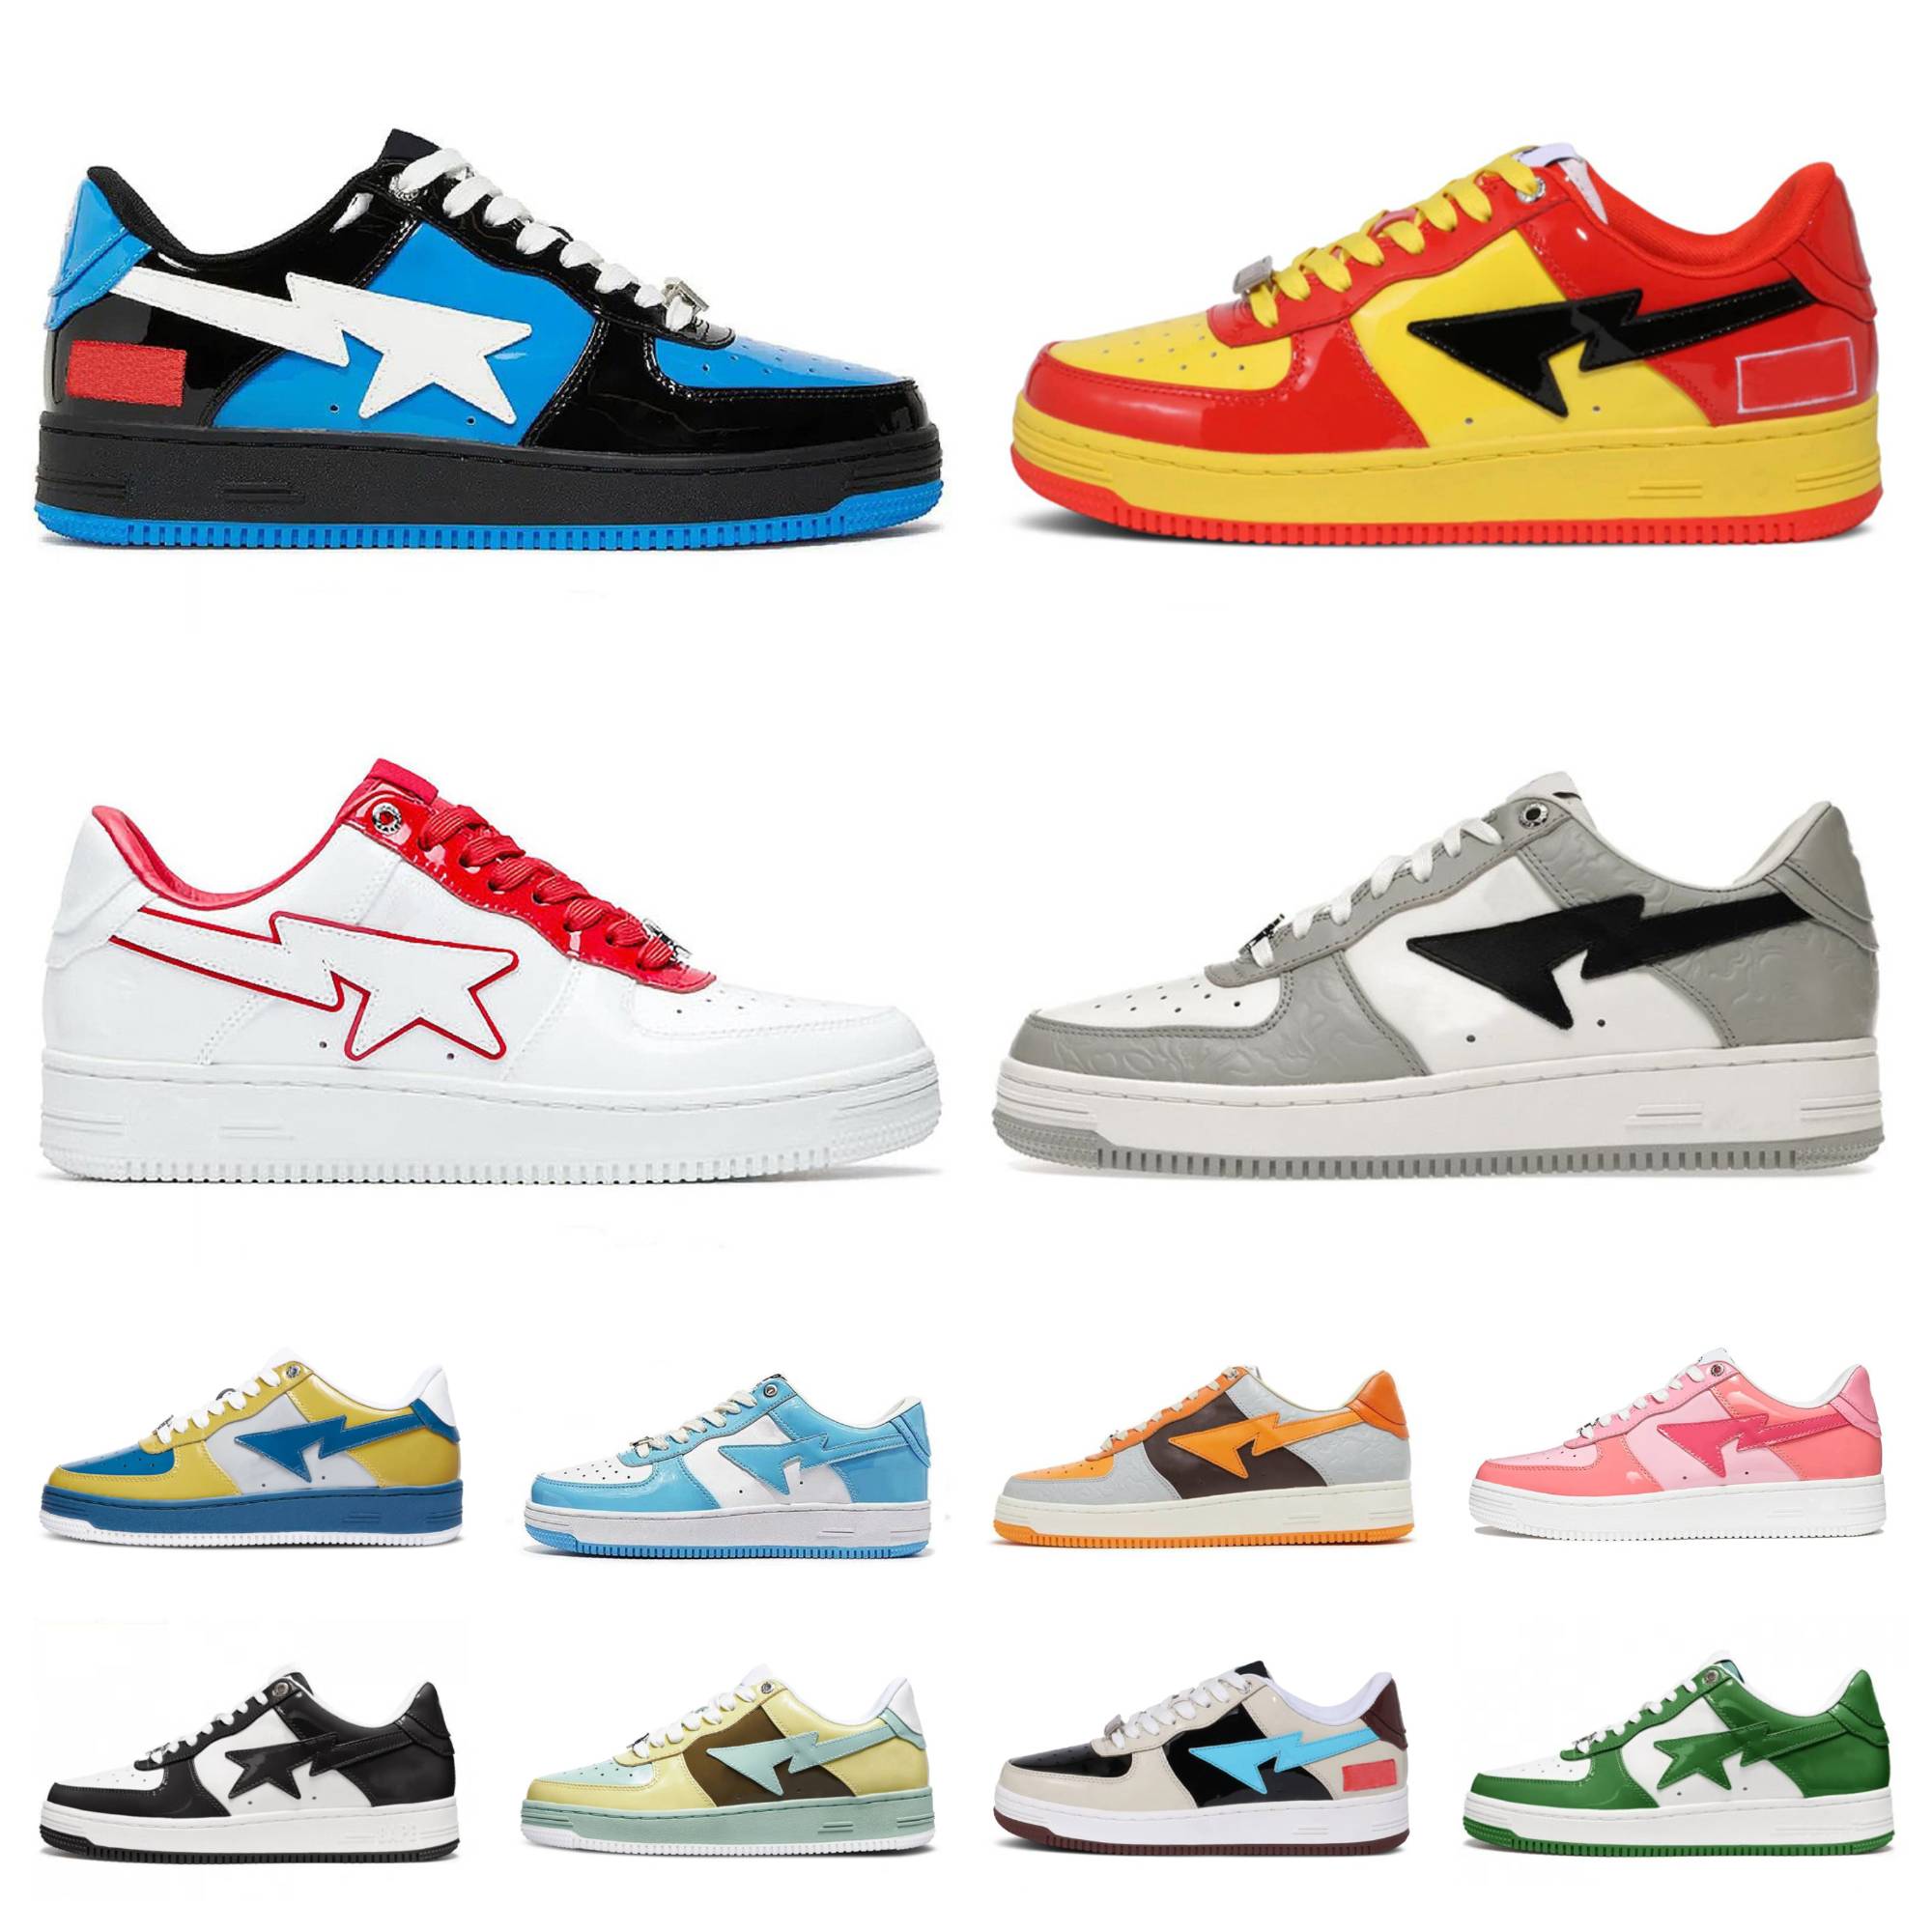 

2023 Bape Sta Bapesta SK8 Casual Shoes Low Baped for men Sneakers Patent Leather Black White Blue Camouflage Skateboarding jogging Sports Star Designer Trainers, Shoes lace